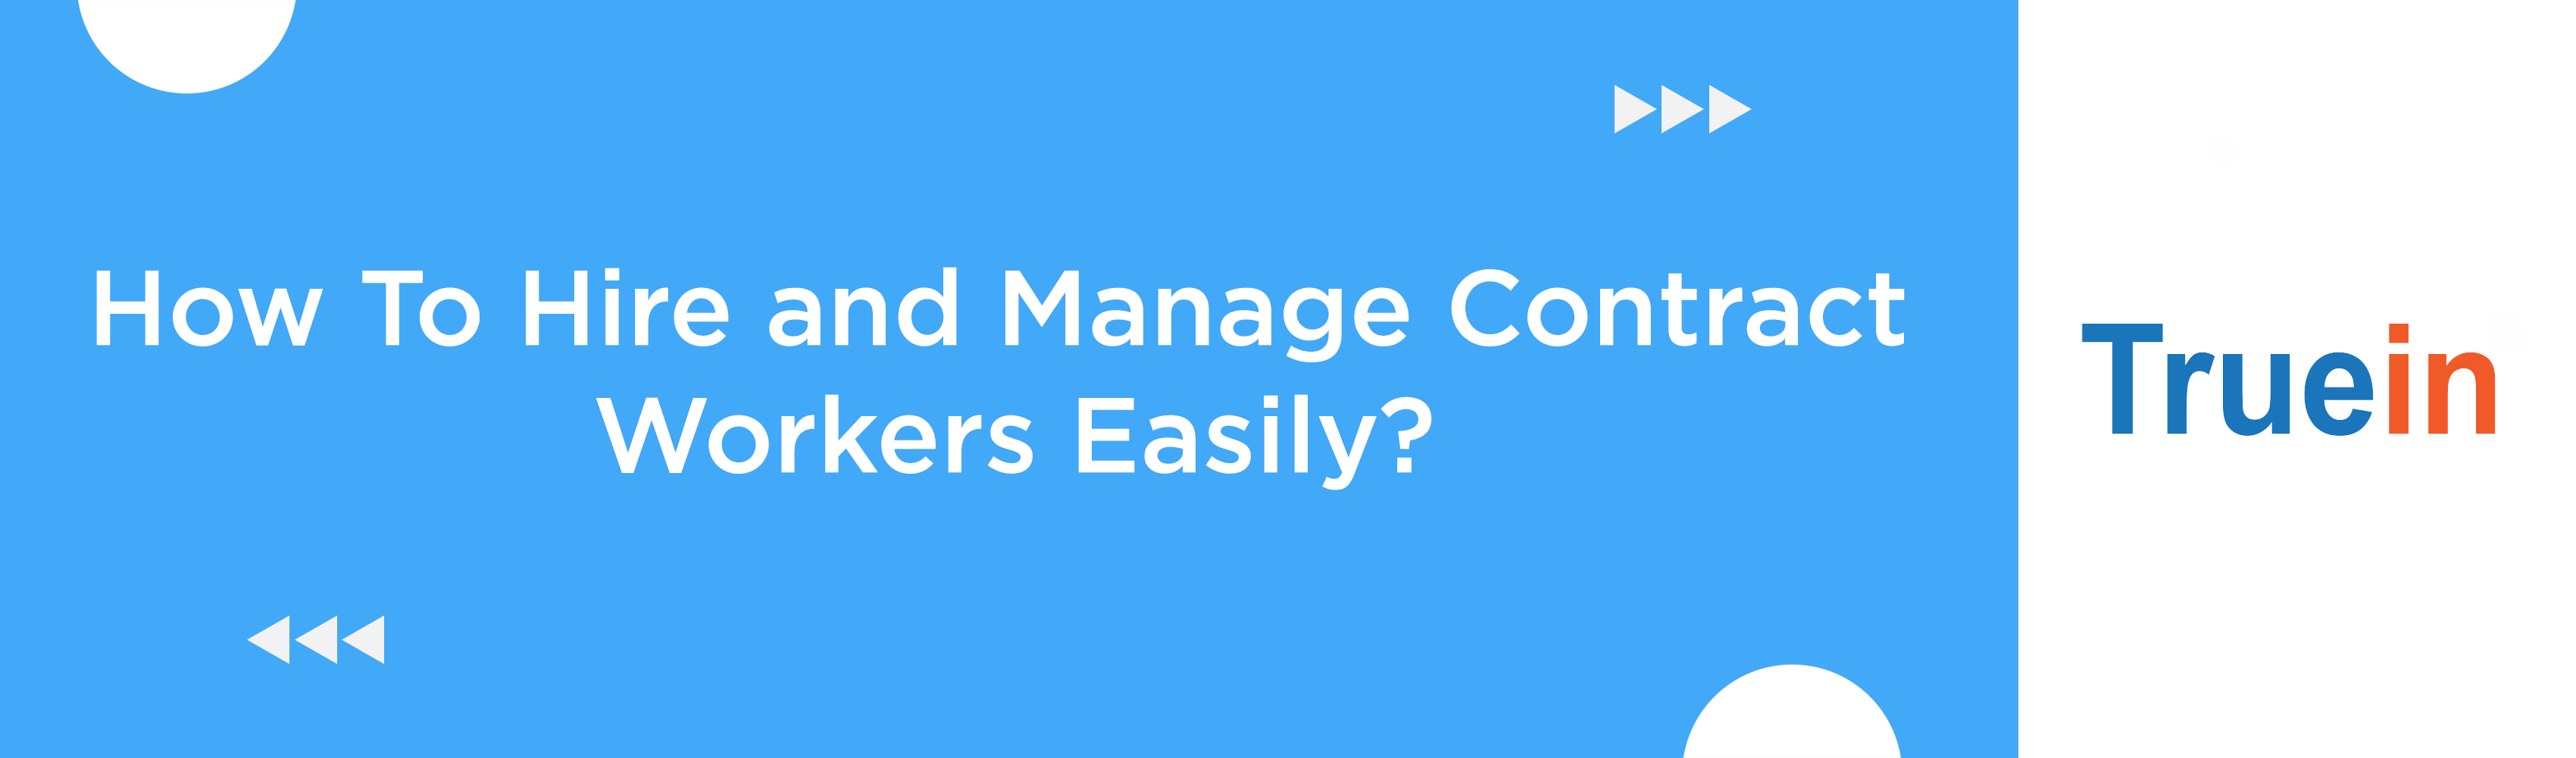 How To Hire and Manage Contract Workers Easily